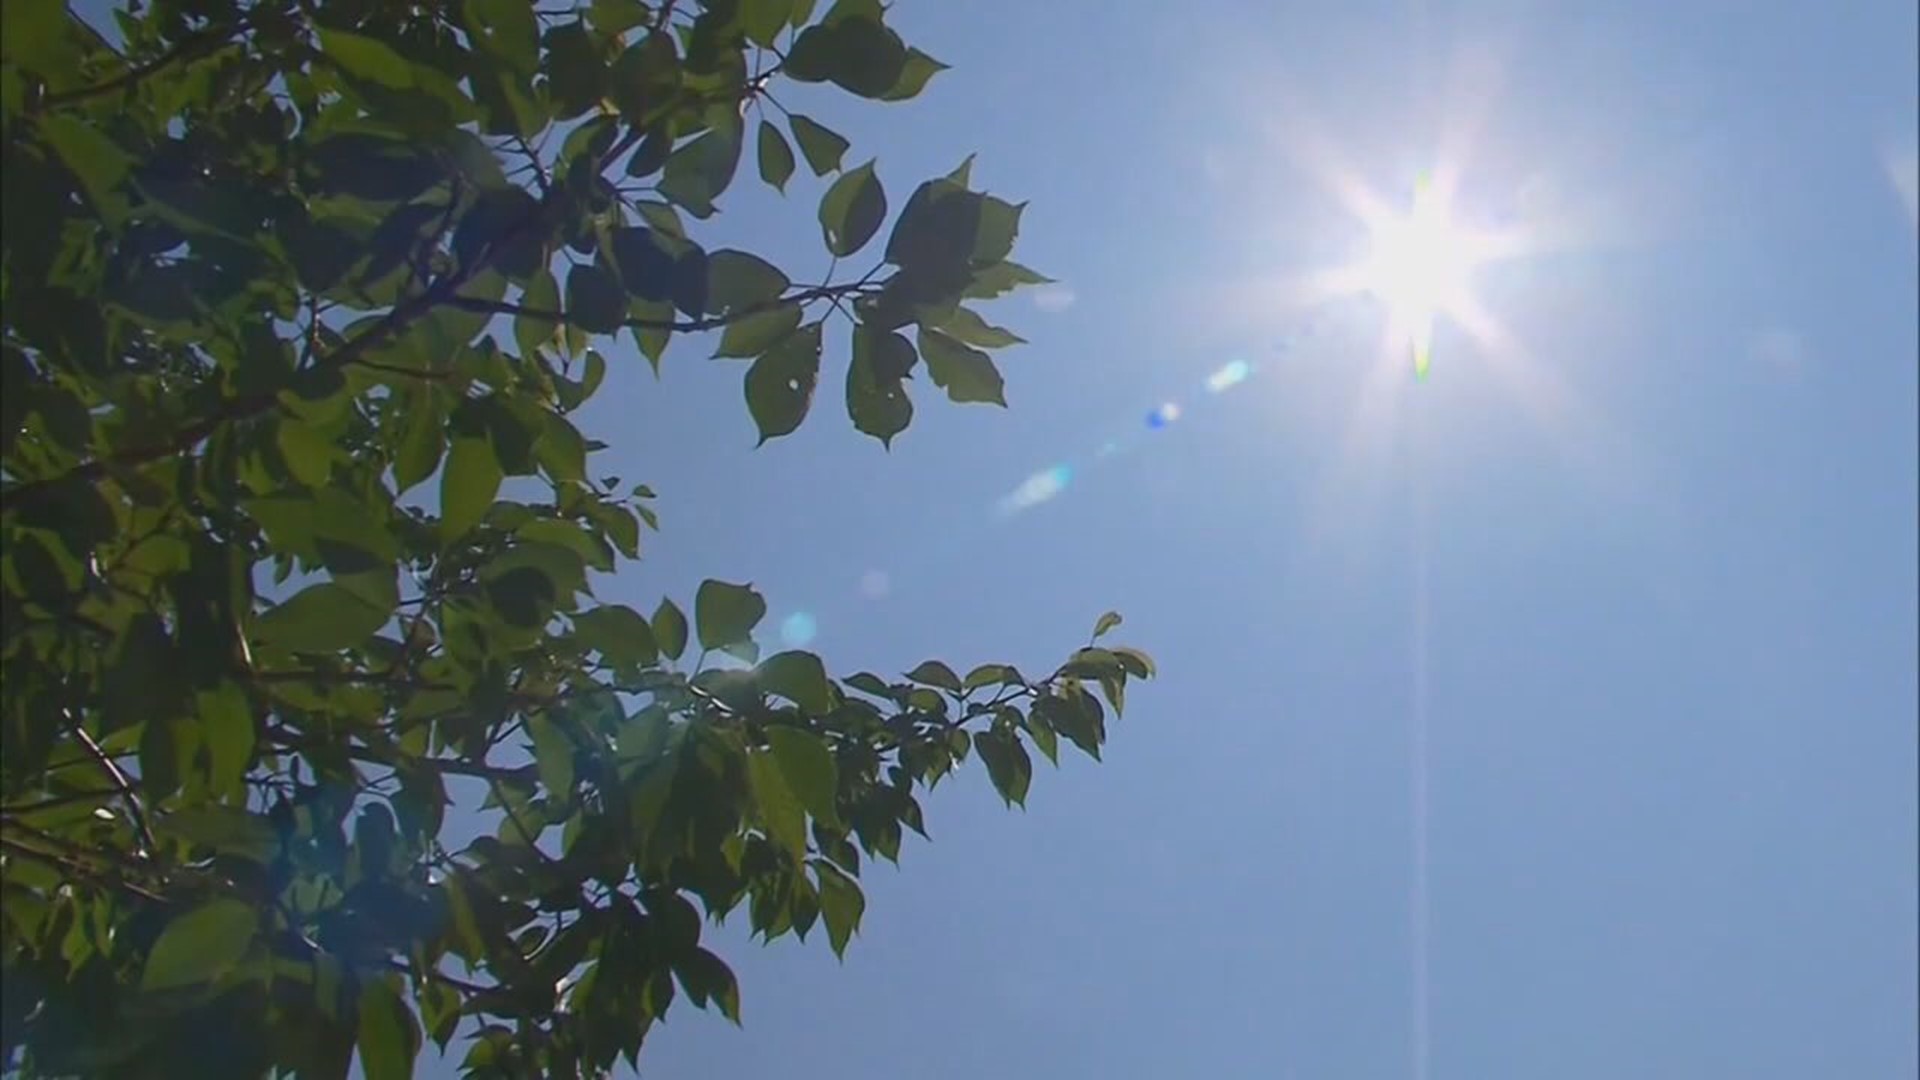 Experts say proper protection is key to avoiding the harmful radiation from the sun.